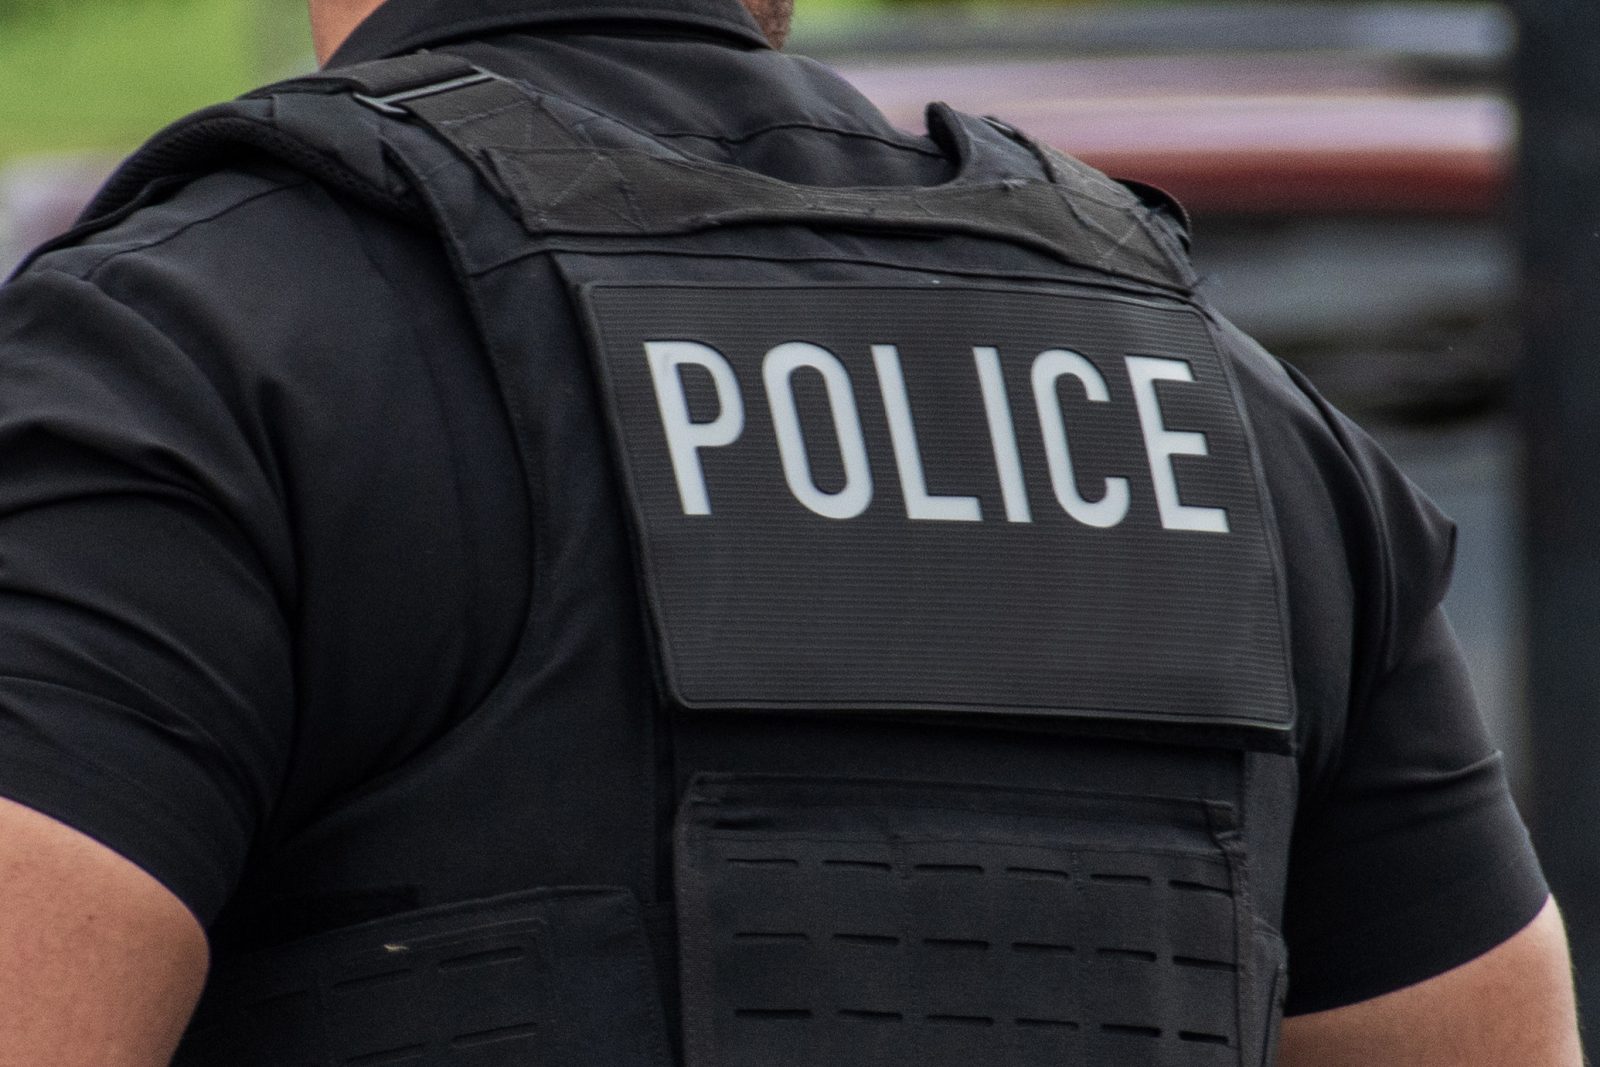 Close-up of the word "police" printed on the back of an officer's uniform.